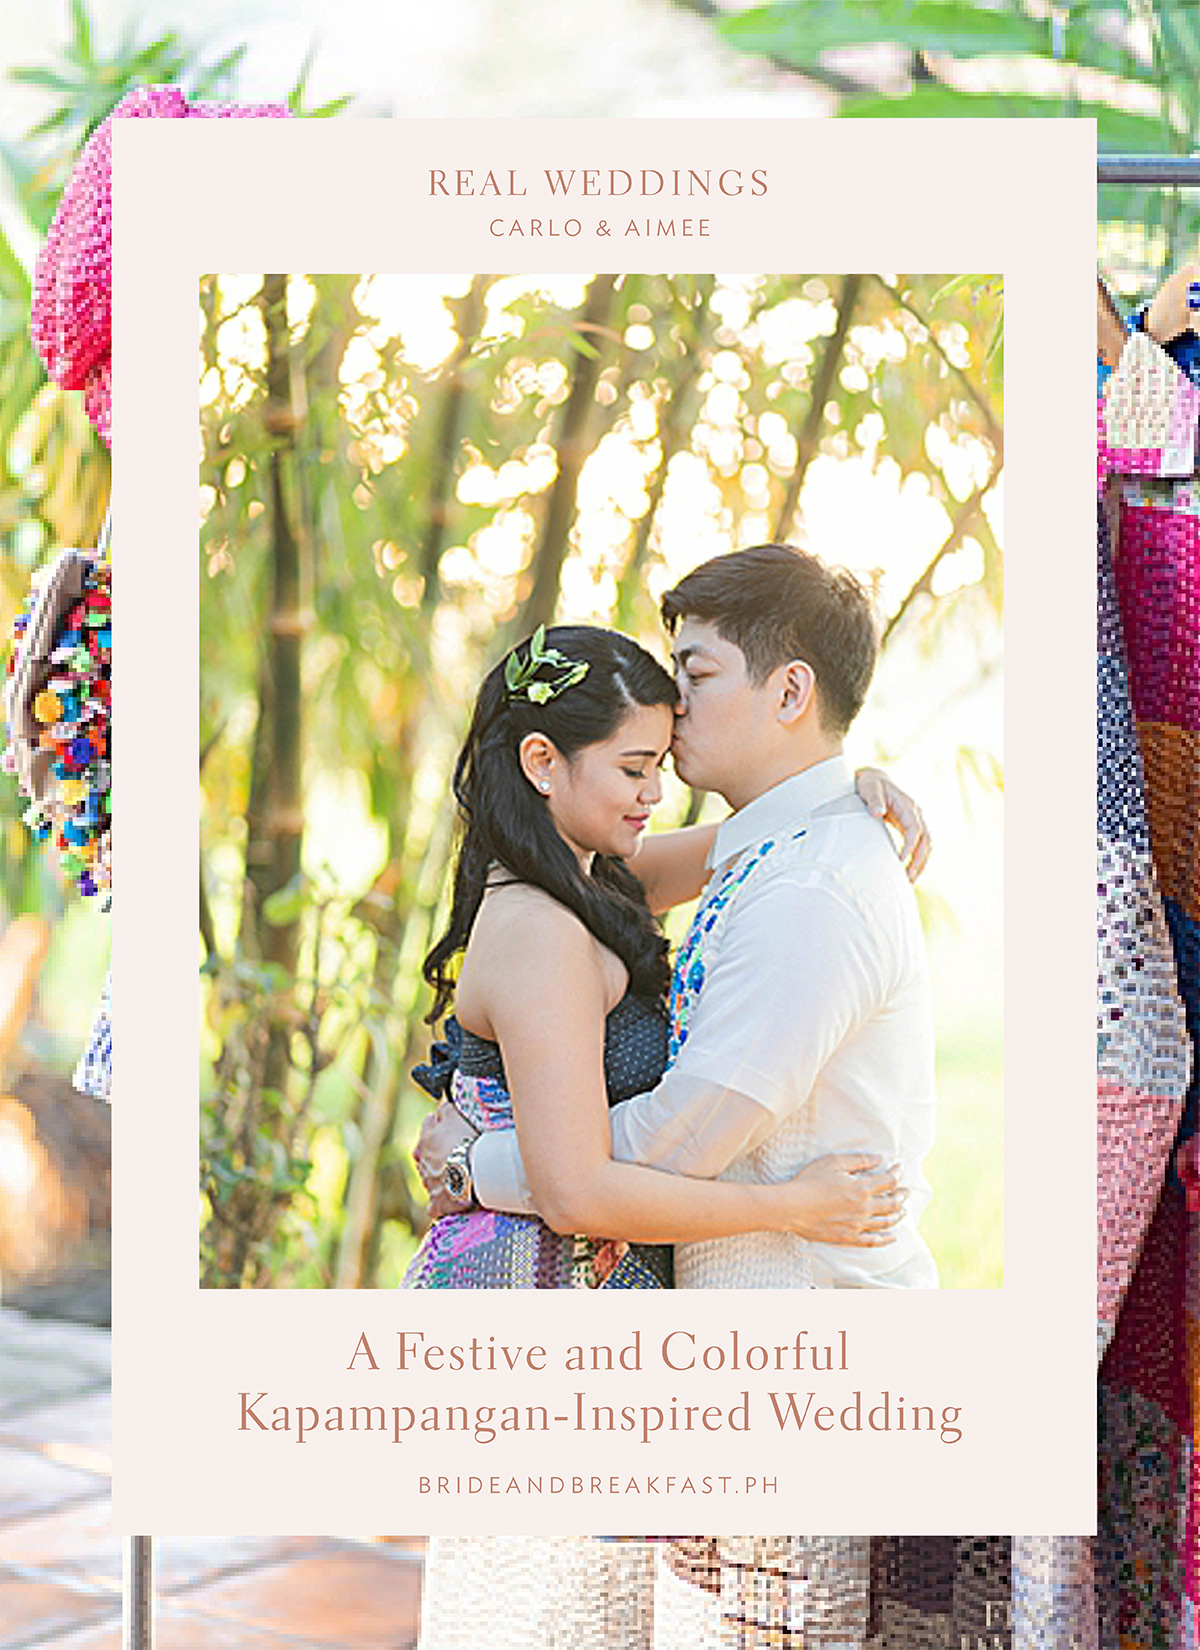 A Non-Traditional Dress is Just One of the Unique Details at This Festive Kapampangan-Inspired Wedding!